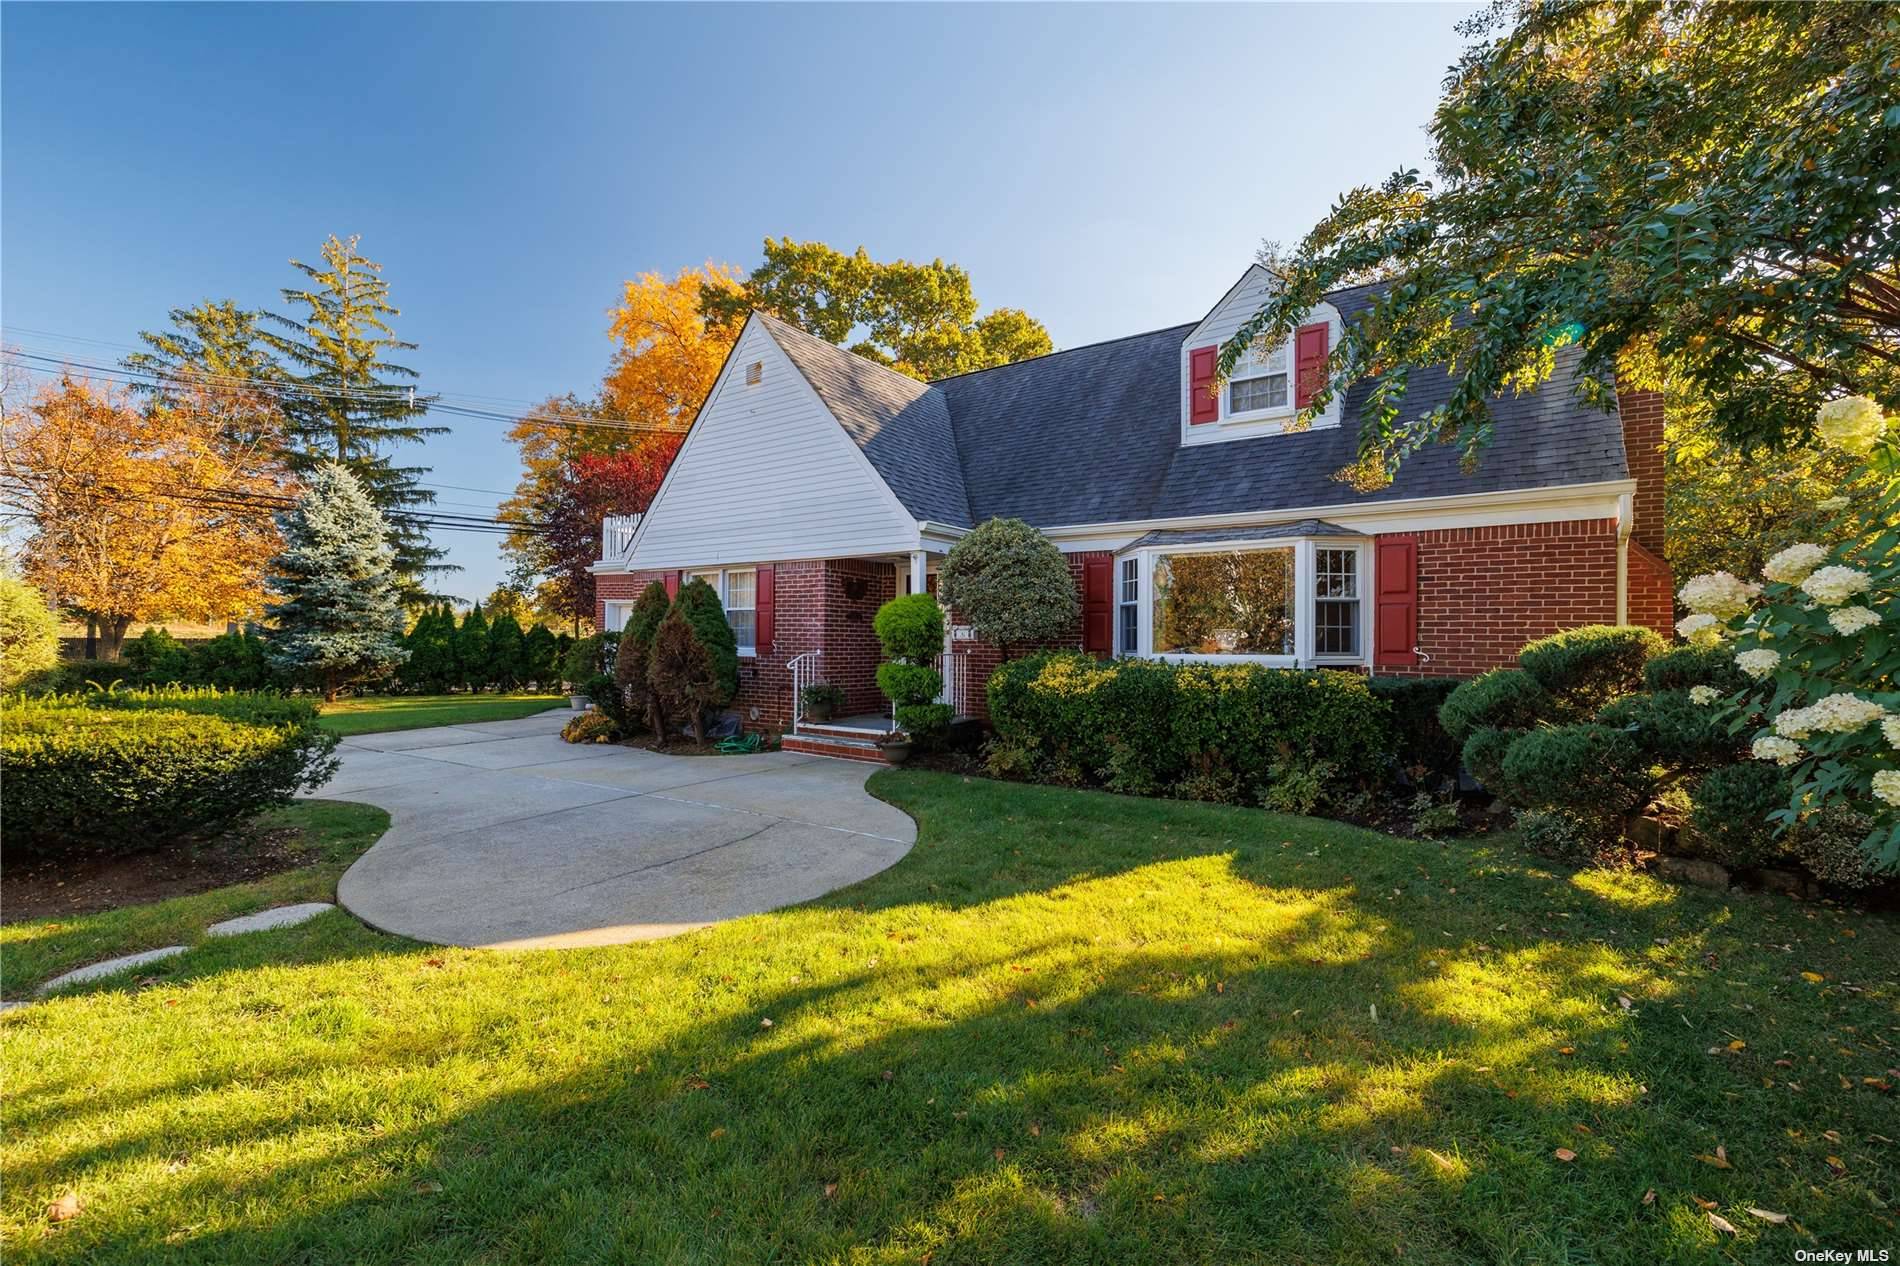 Welcome to 164 Bulson Rd, where classic charm meets beautiful updates in perfect harmony.